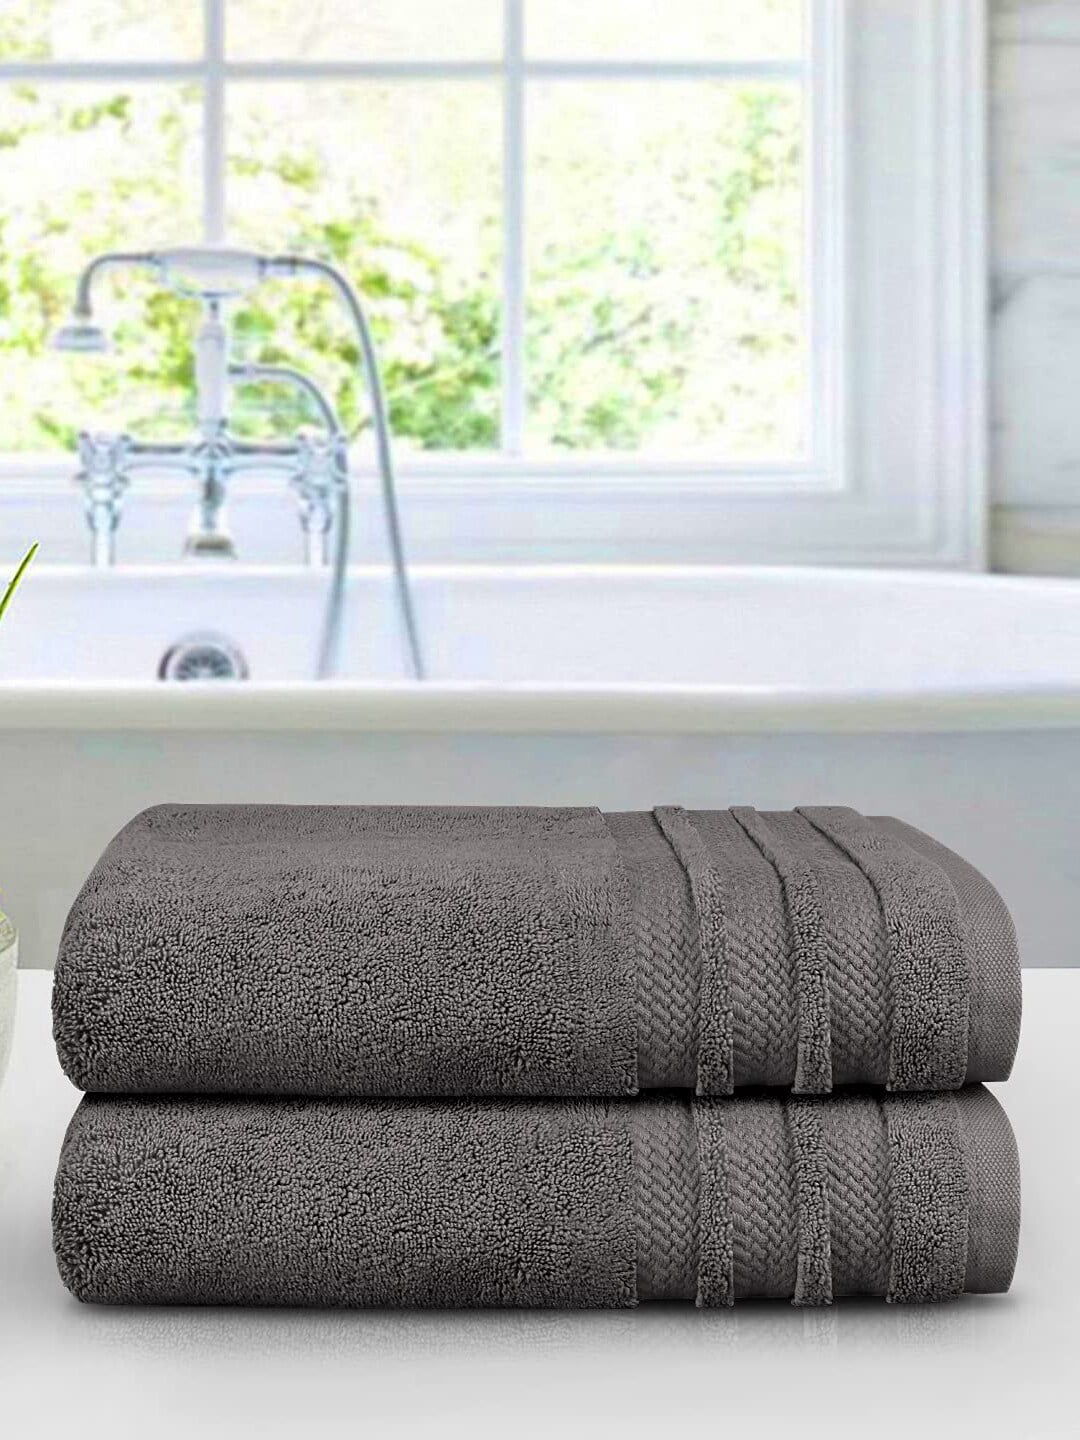 Trident 2 Piece Bath Towel Set Charcoal Grey Luxury Collection 100% Cotton 625 GSM Price in India